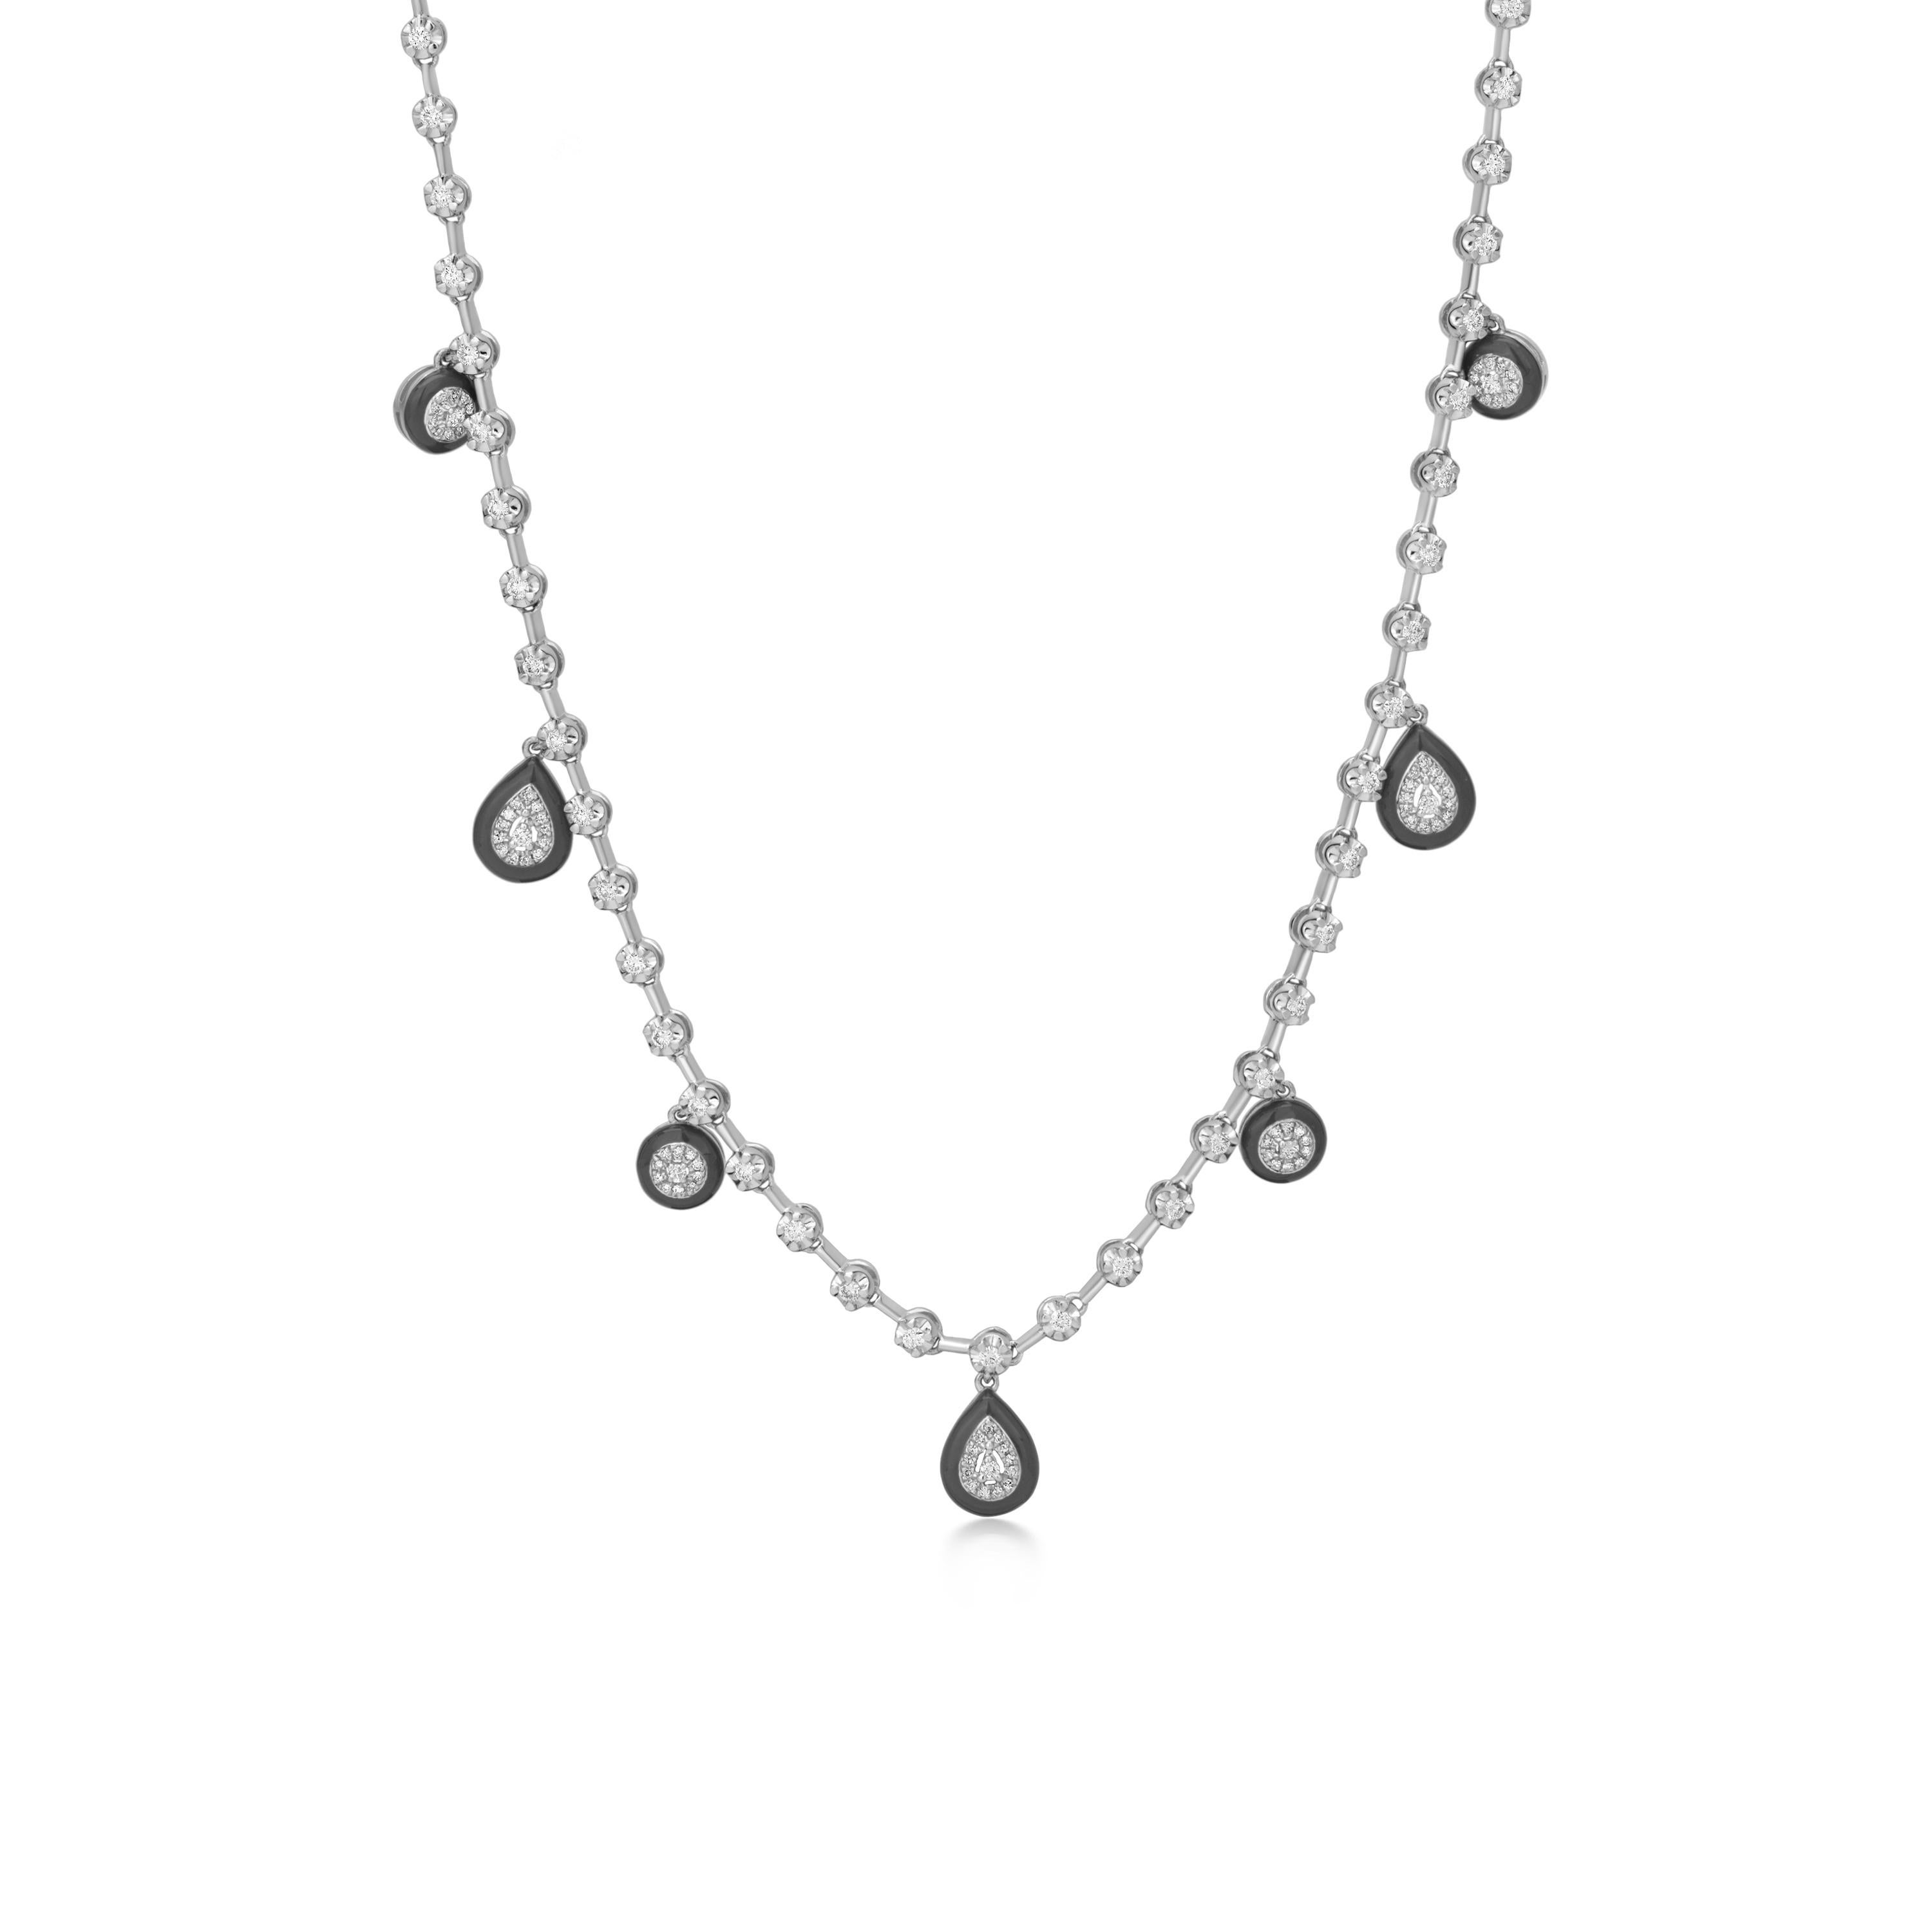 Round Cut Luxle 0.77 Carat T.W. Diamond Charm Necklace in 18k White Gold For Sale